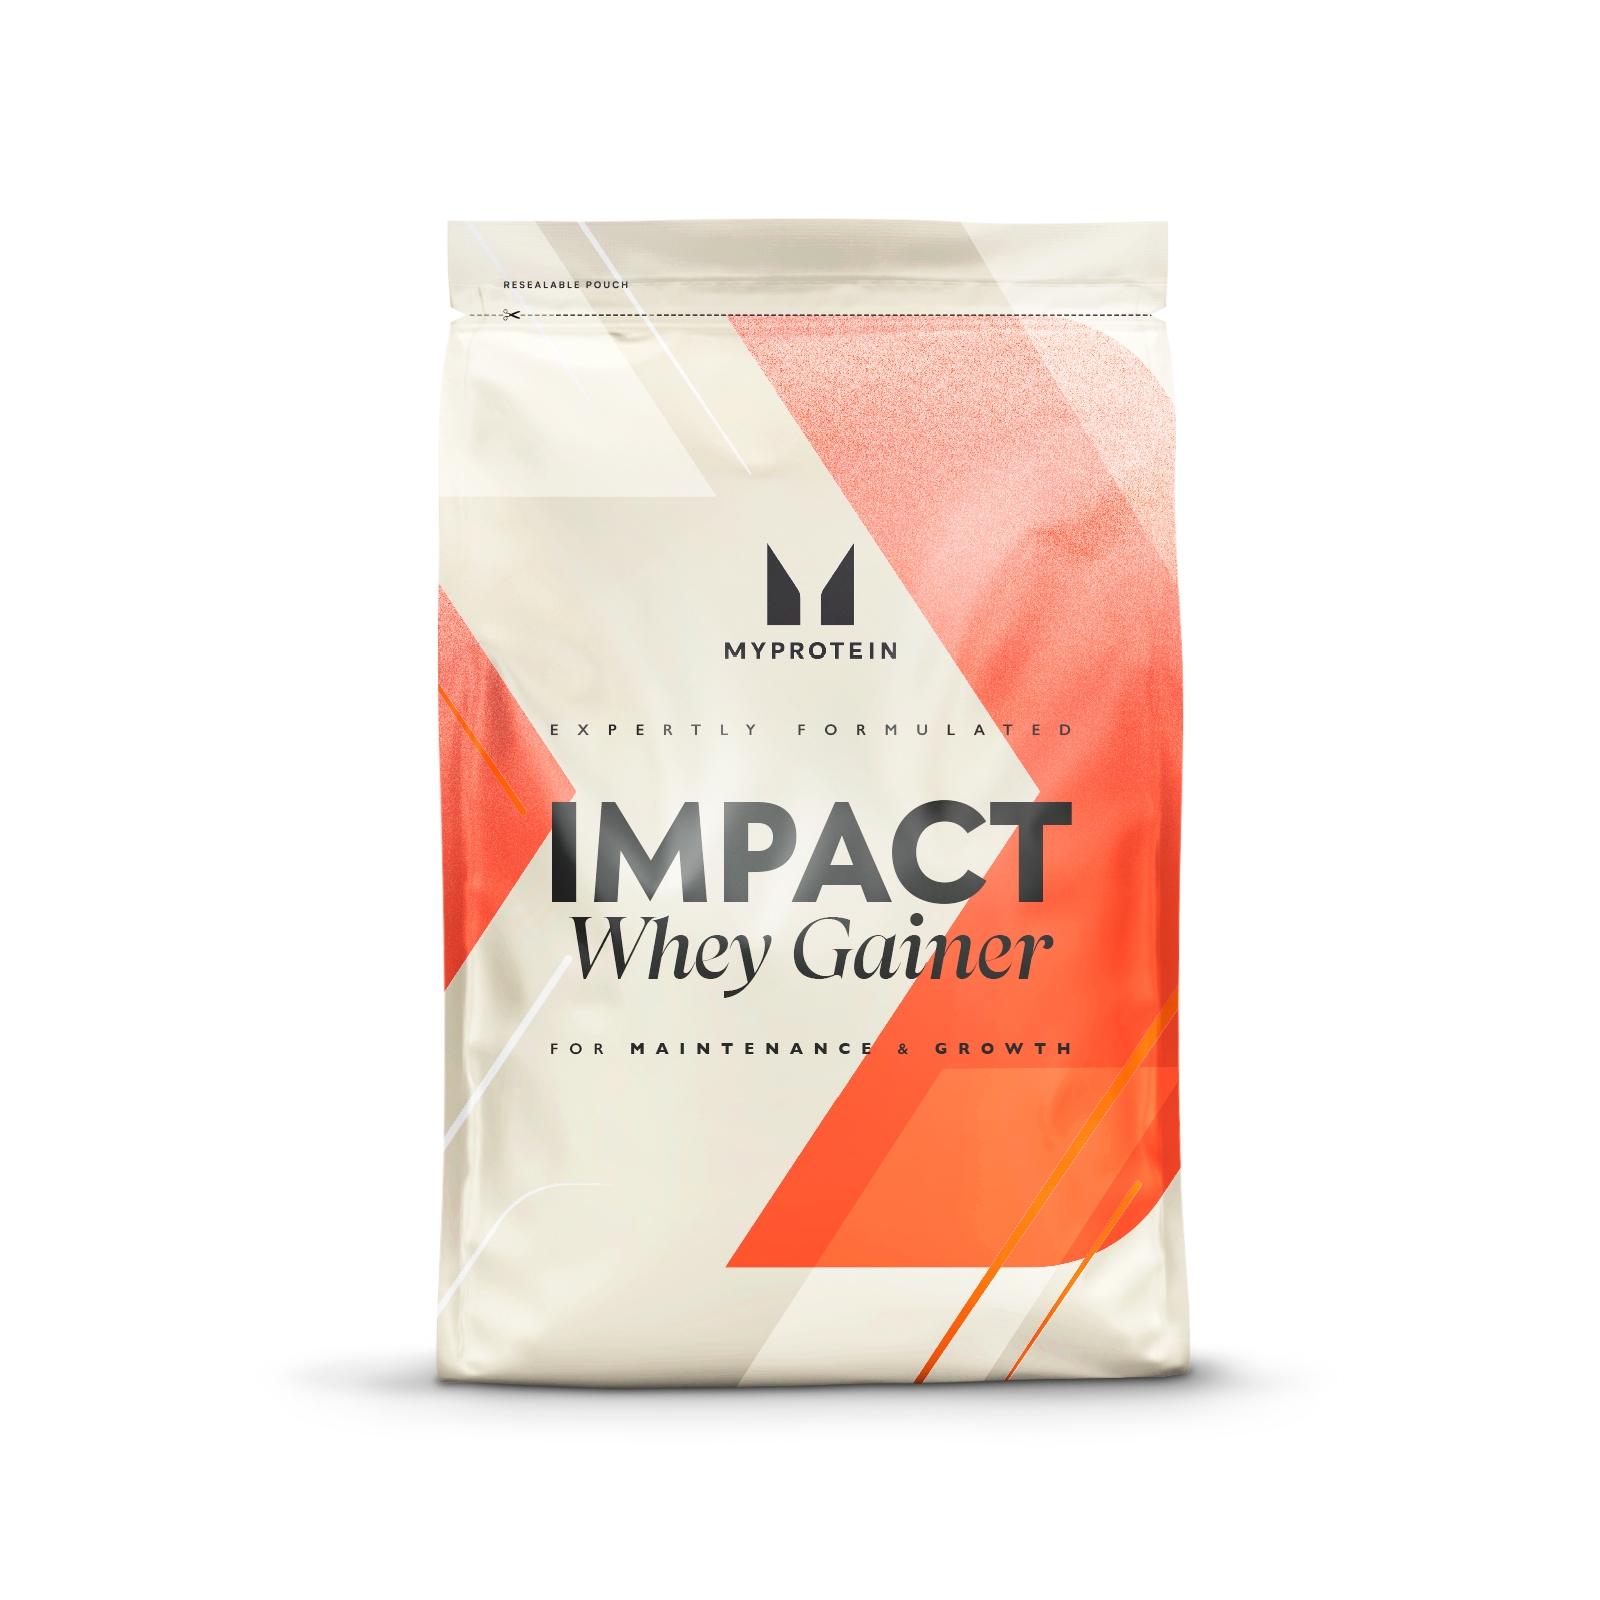 Impact Weight Gainer - 1kg - Iced Latte